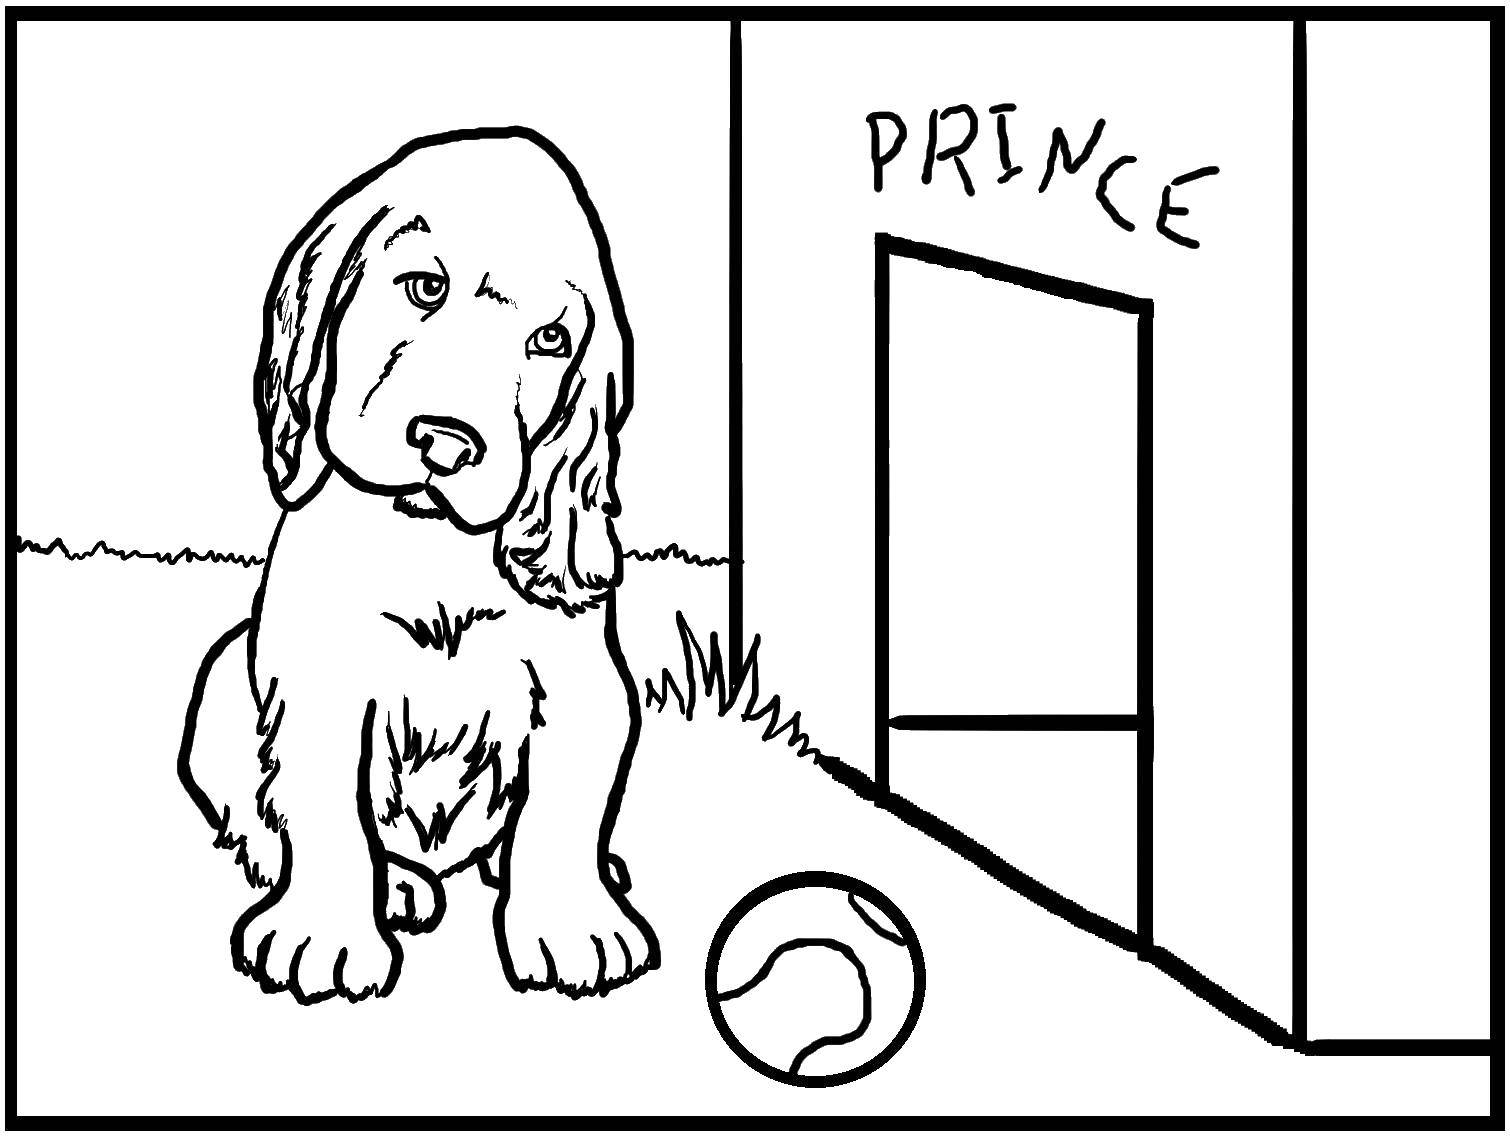 Coloring A dog with a ball. Category Pets allowed. Tags:  the dog, a ball.